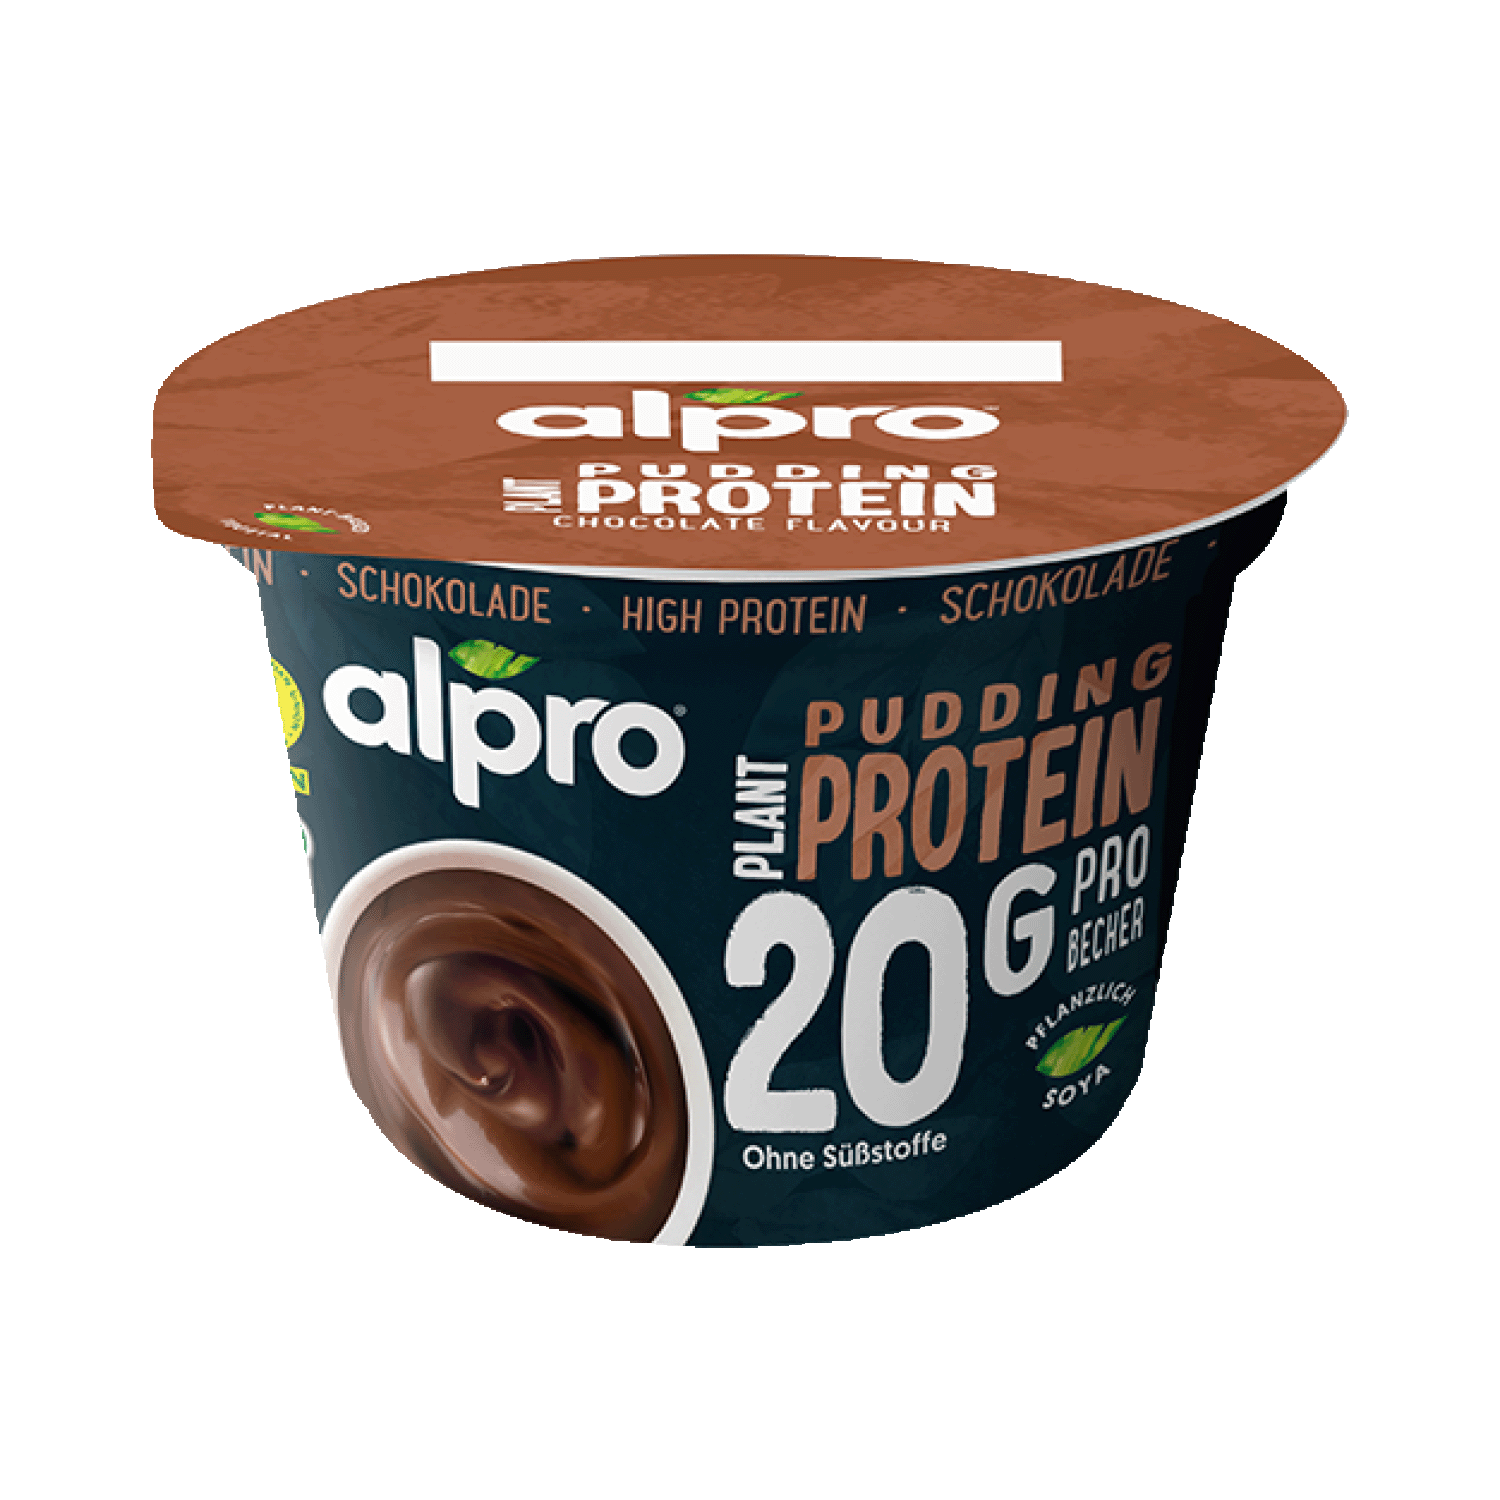 High Protein Pudding Chocolate, 200g